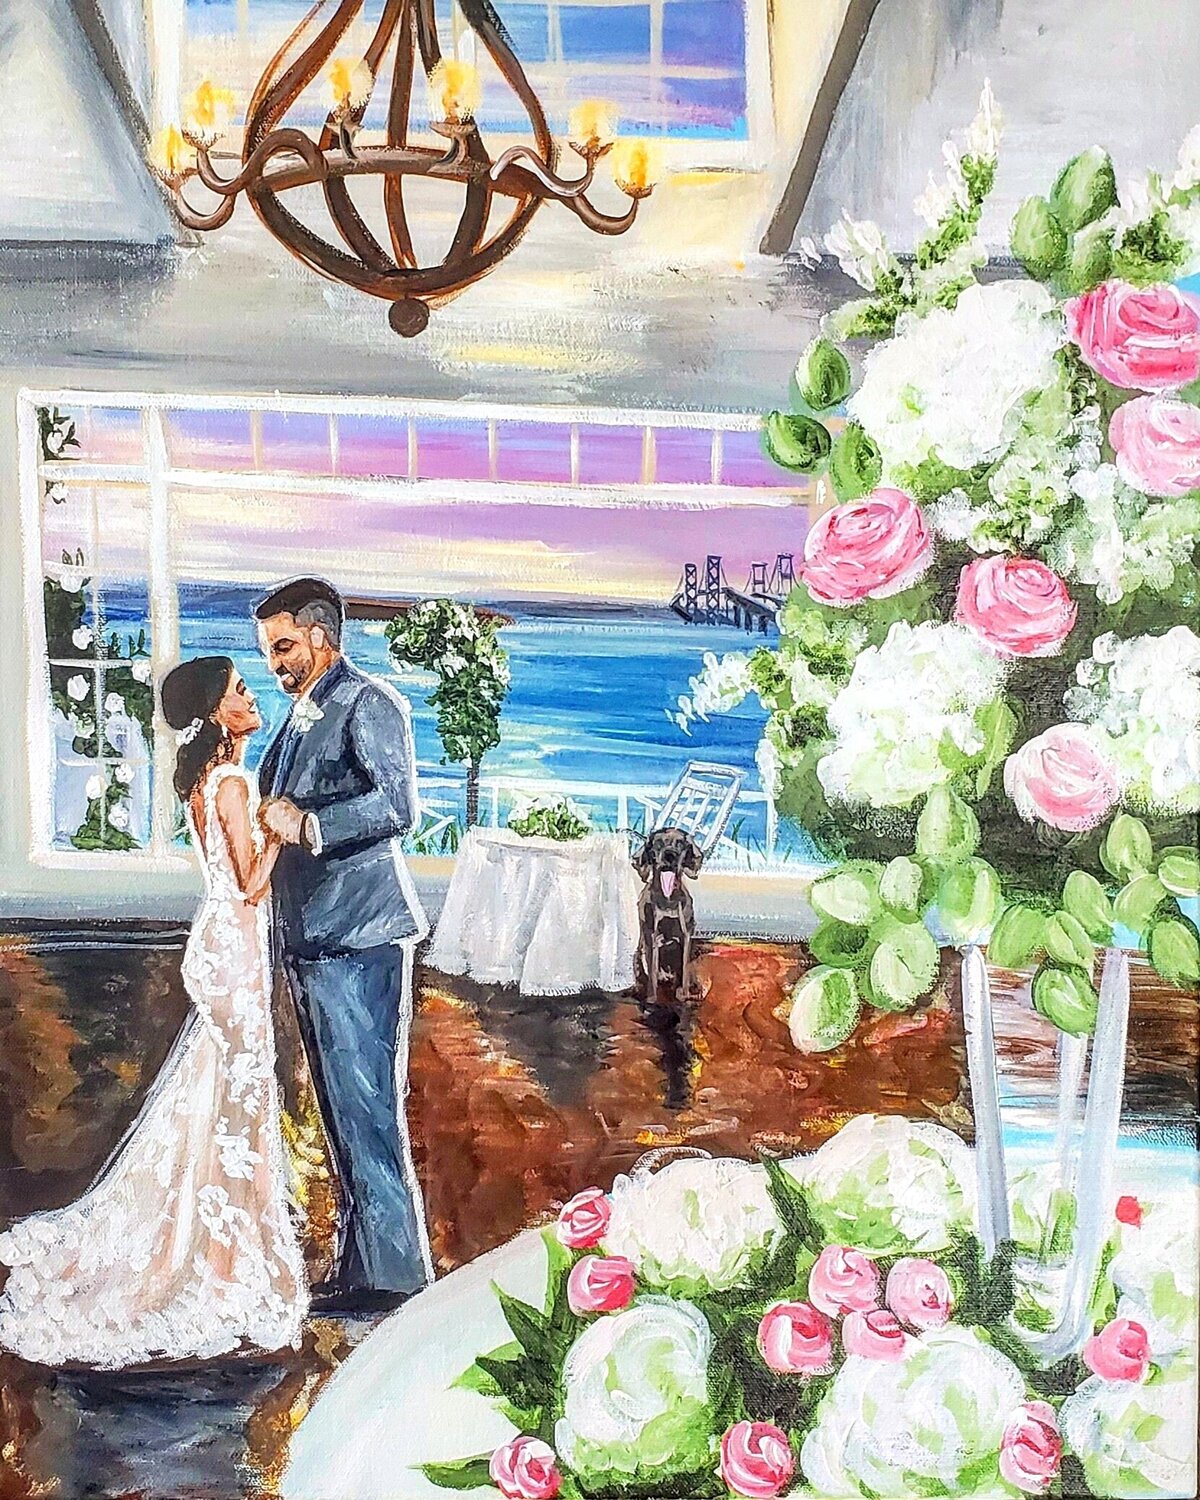 The tall pink and white floral centerpieces made for the perfect framing piece for this first dance live wedding painting on the water